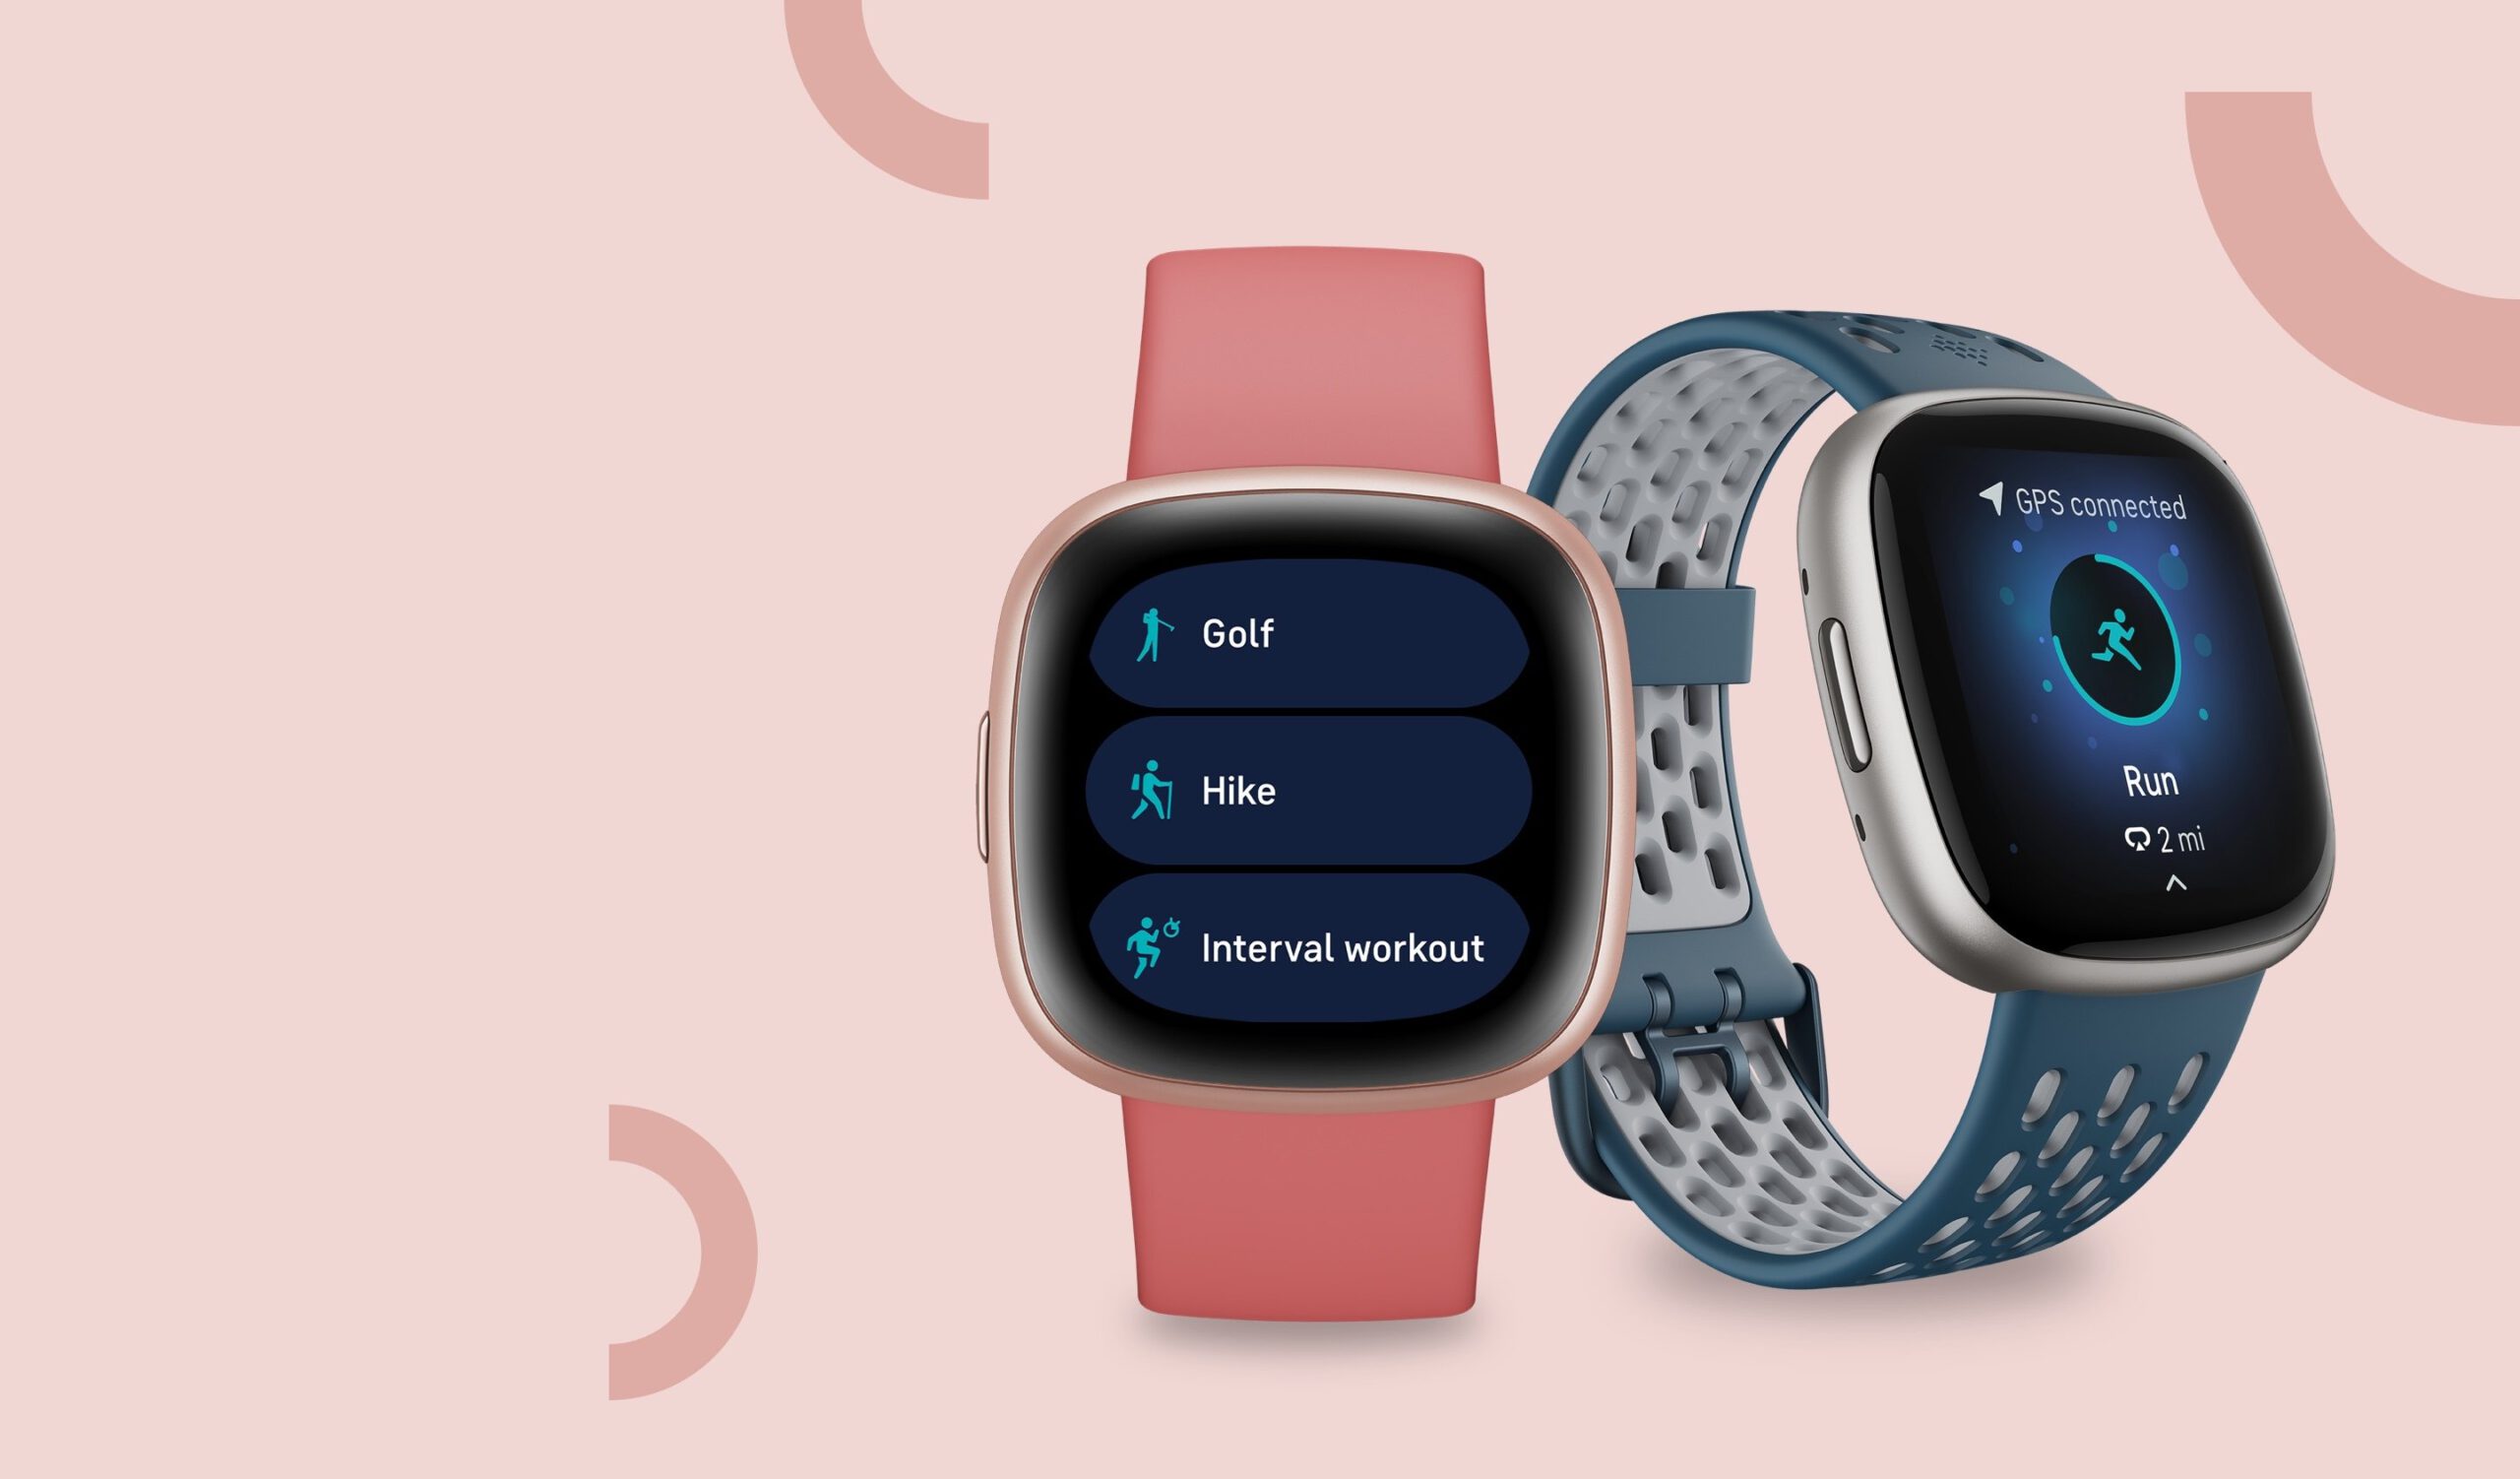 Two Fitbit Versa smartwatches on a pink background